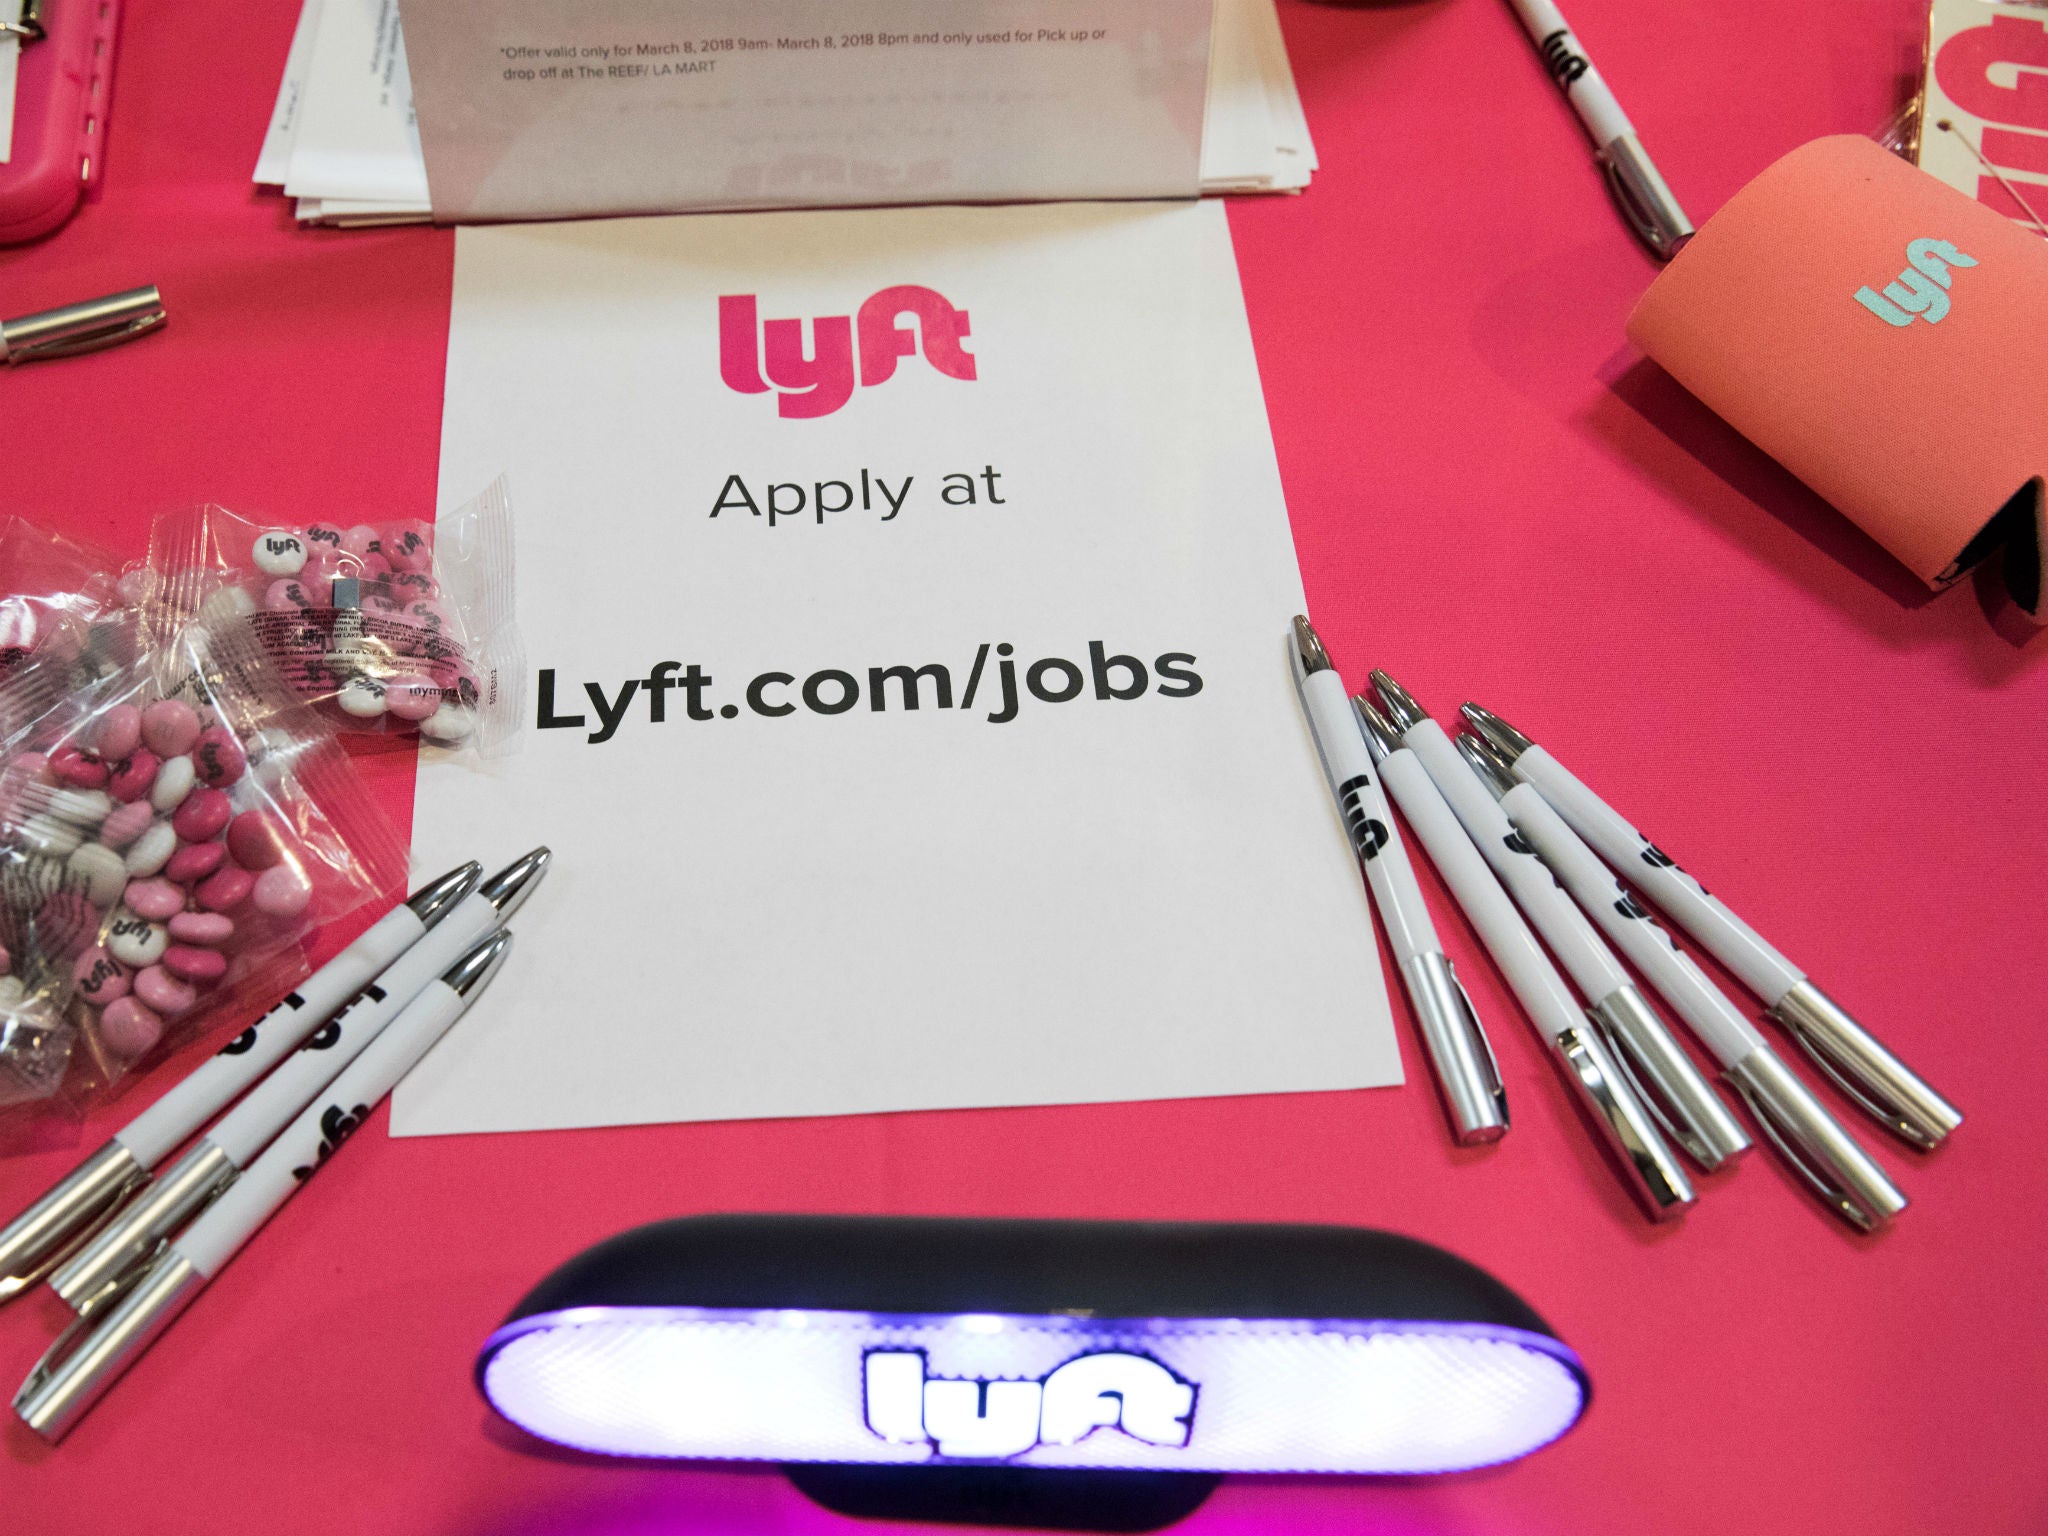 Despite the shiny happy outlook, Lyft is losing shedloads of money on an annual basis